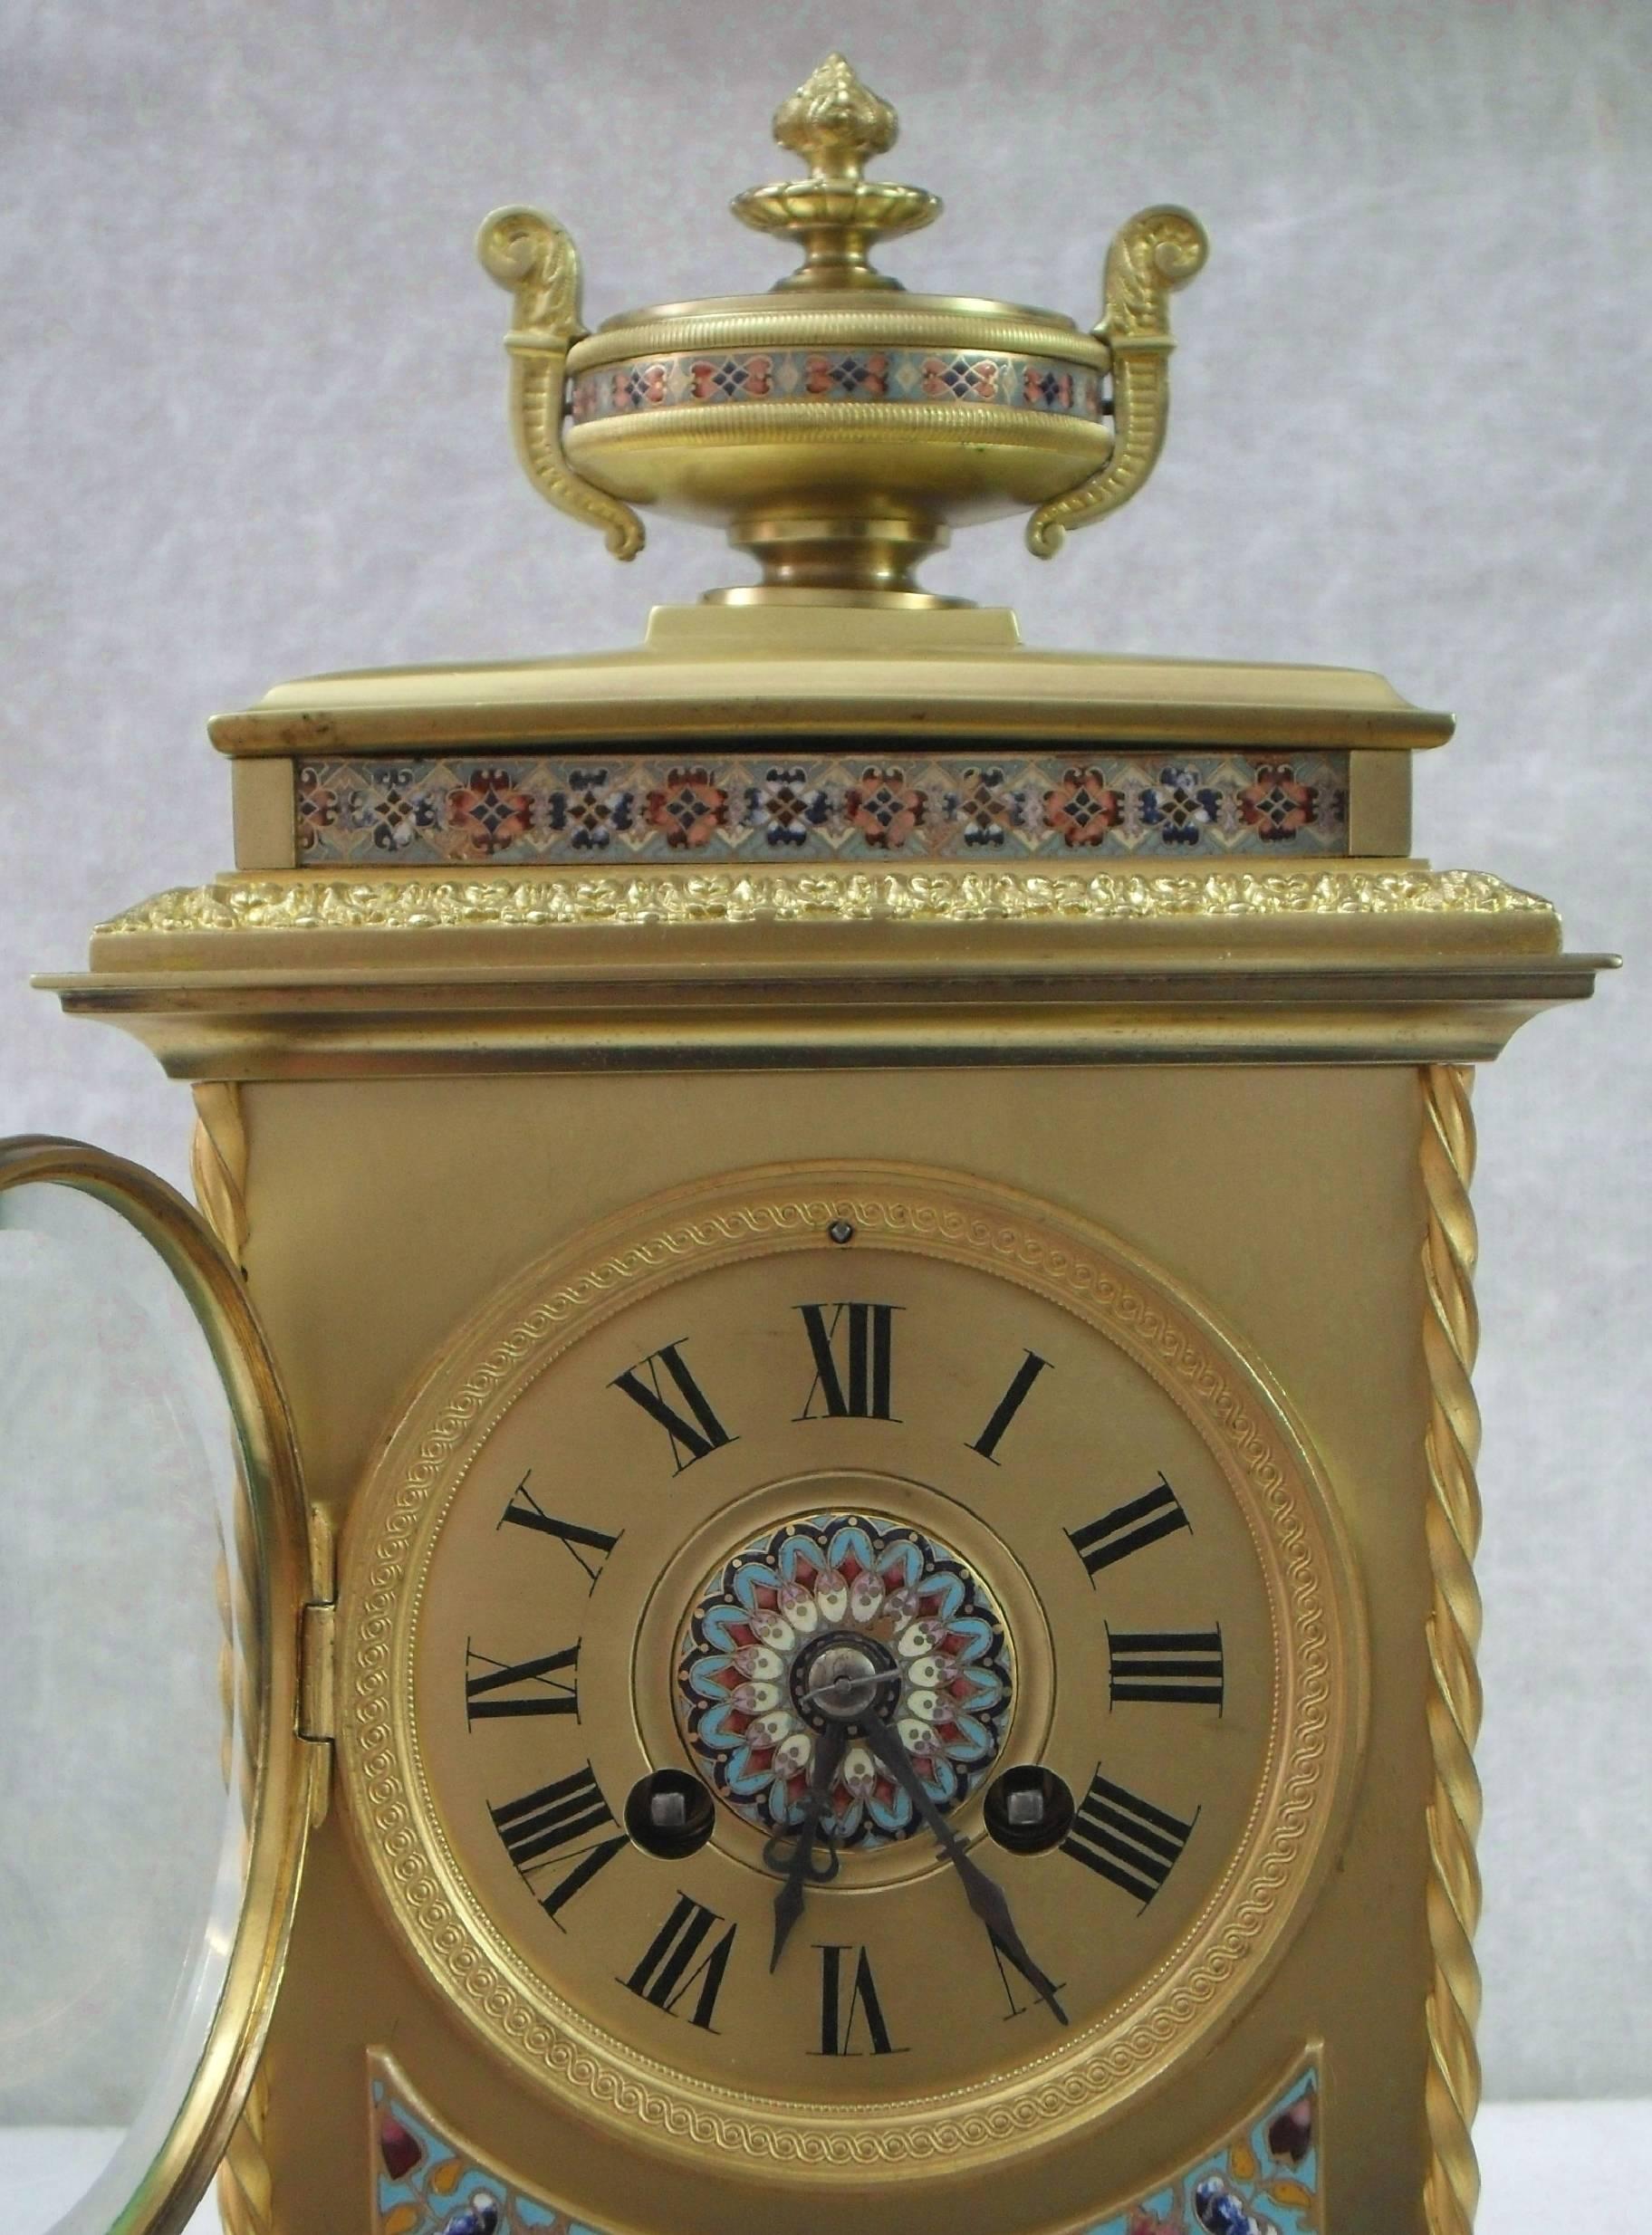 A very good quality and decorative French Belle Epoque brass and champleve mantel clock with colourful inlaid enamels and ornamental brass detail with urn to the top. The movement is a French eight day which strikes the hours and half hours on a